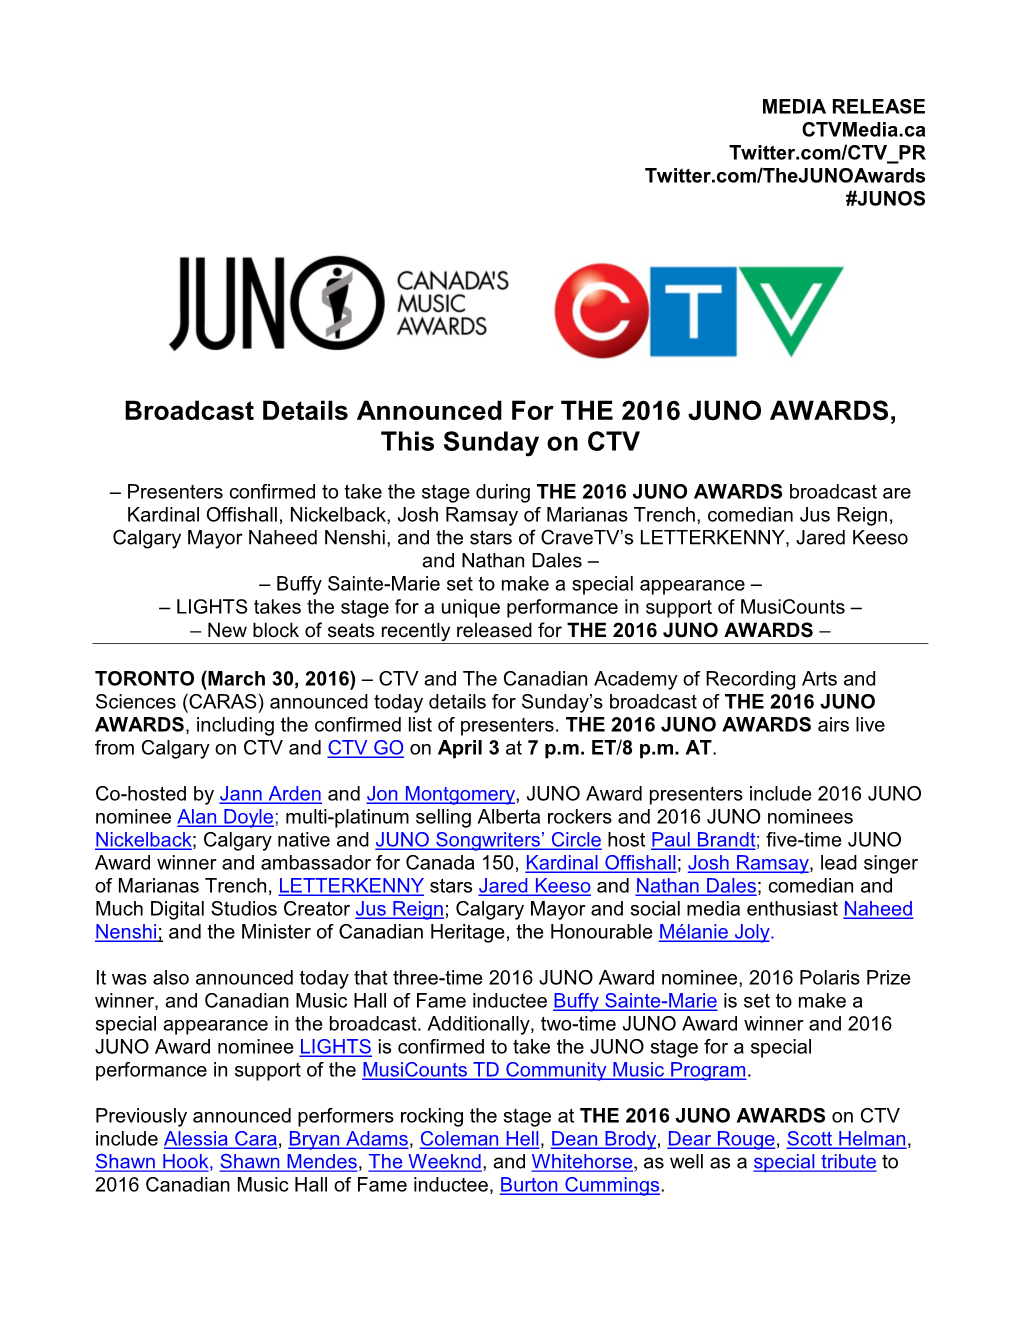 Broadcast Details Announced for the 2016 JUNO AWARDS, This Sunday on CTV